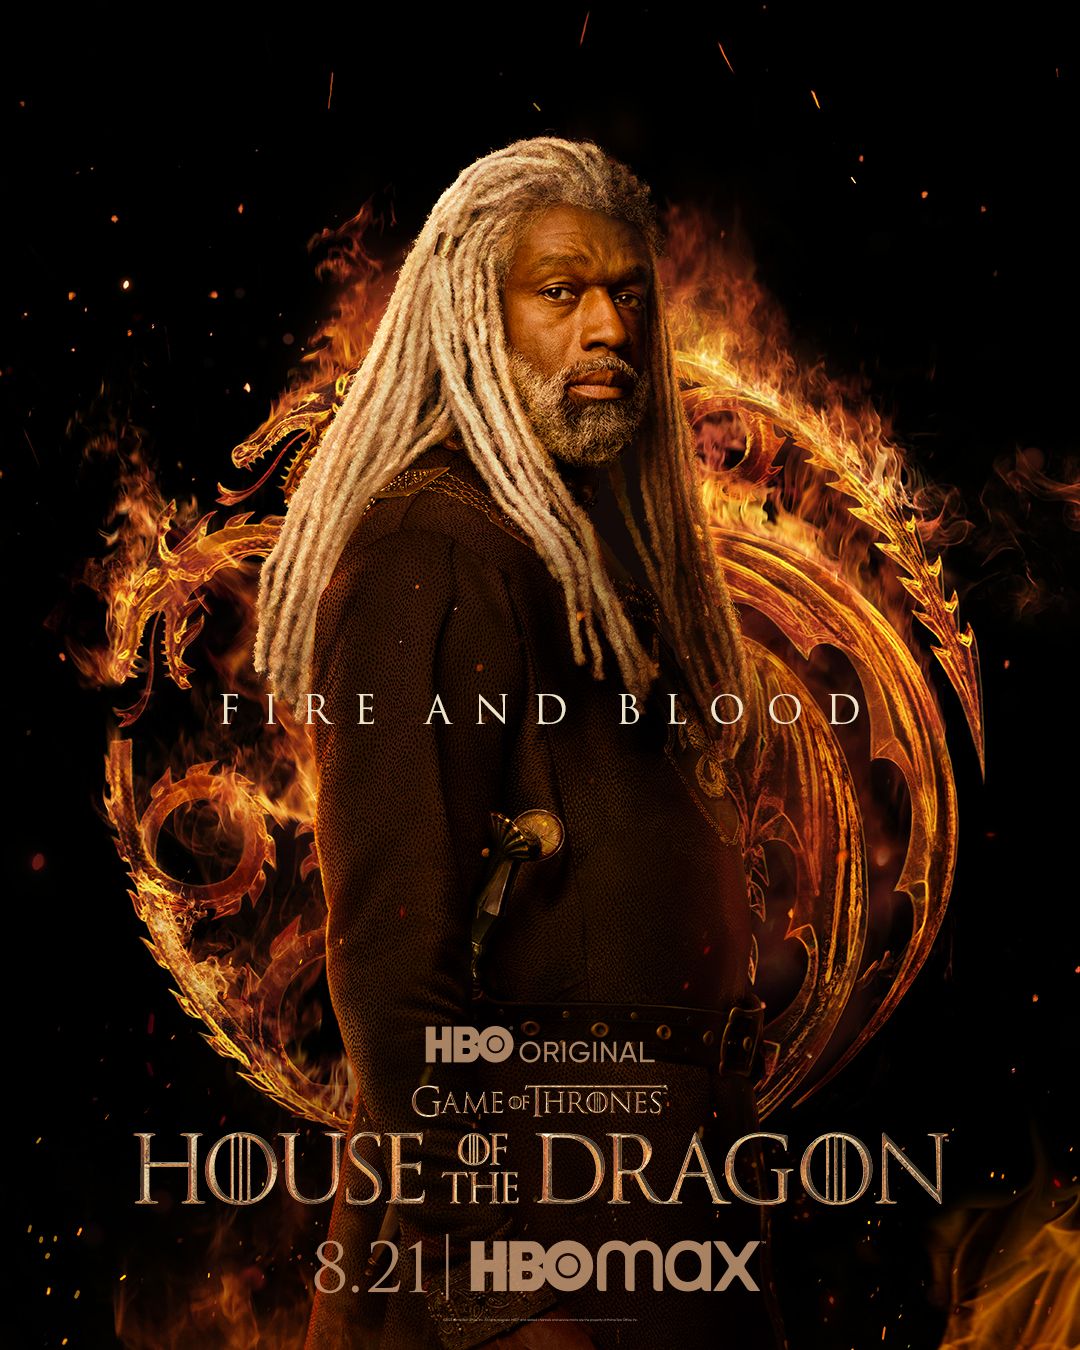 House of the Dragon Release Date, Trailer, Story & News to Know